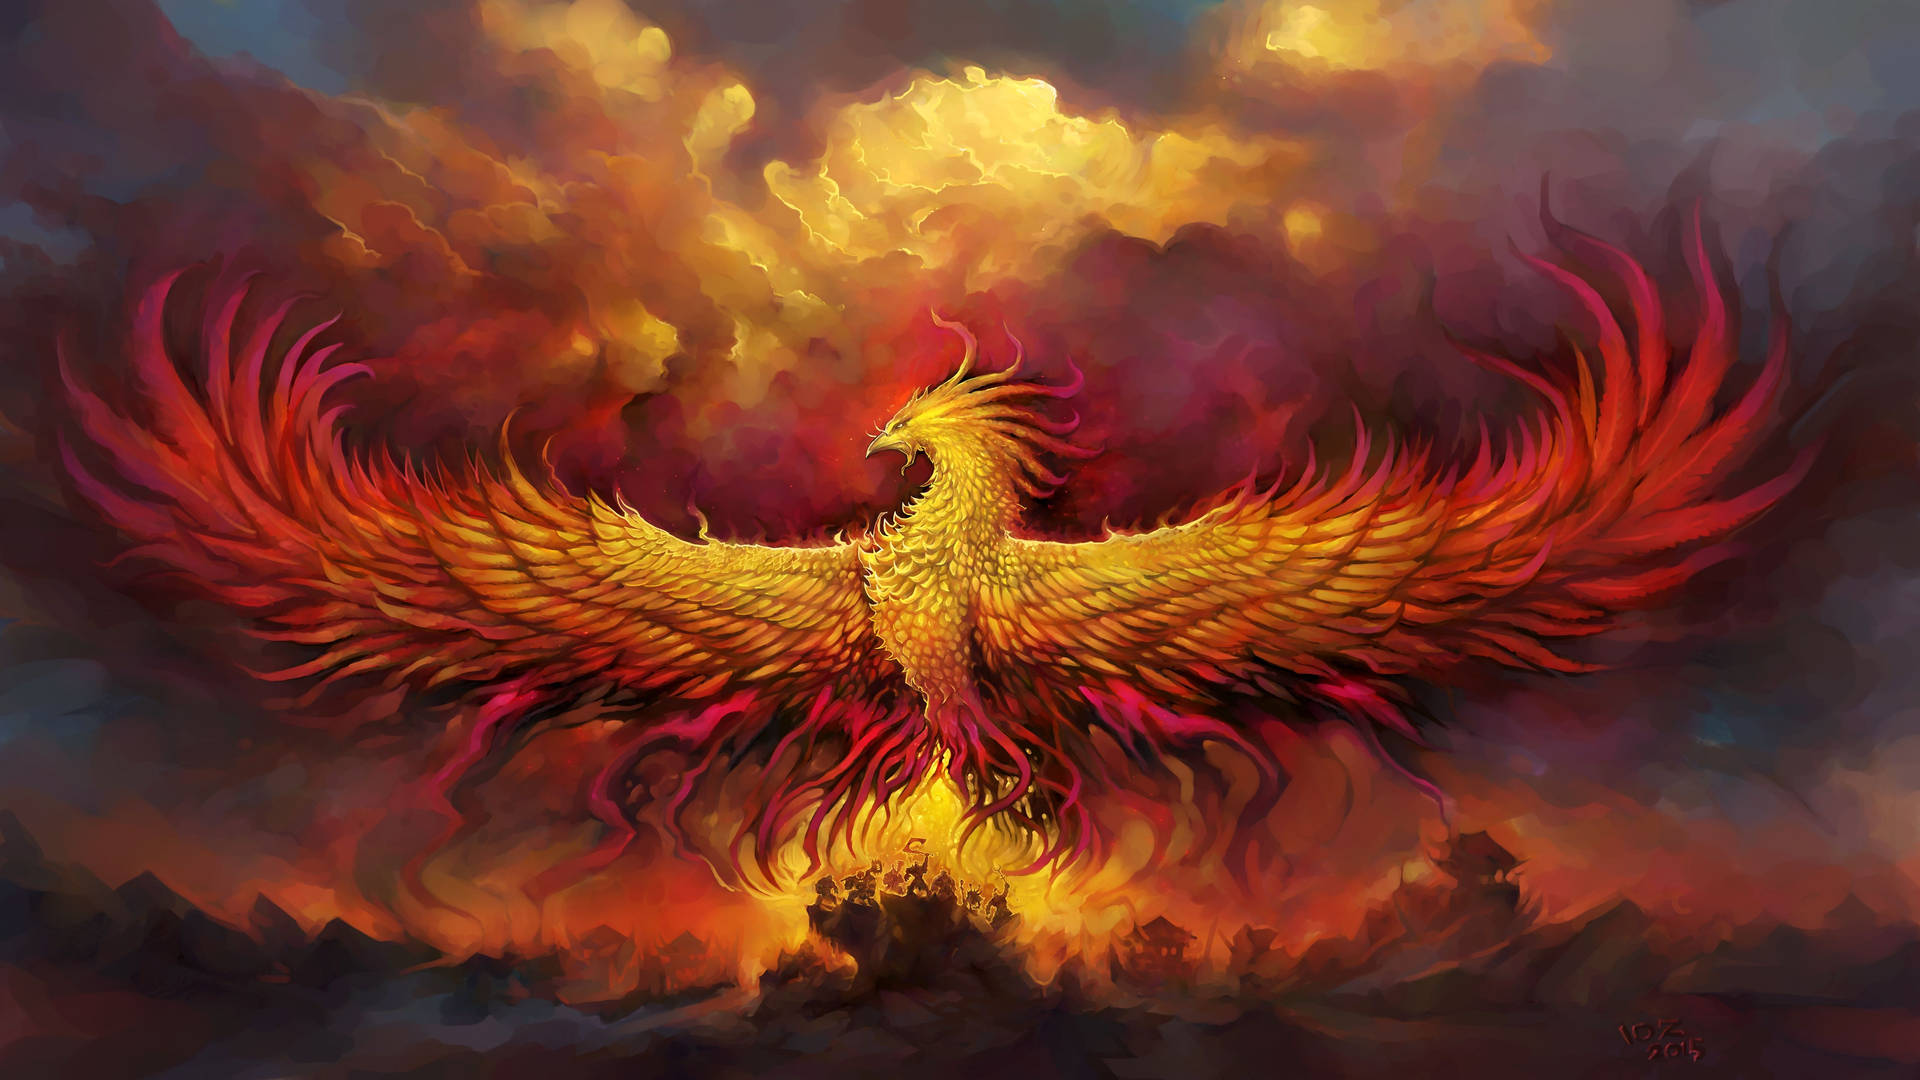 The Power Of Transformation - The Fiery Phoenix Background